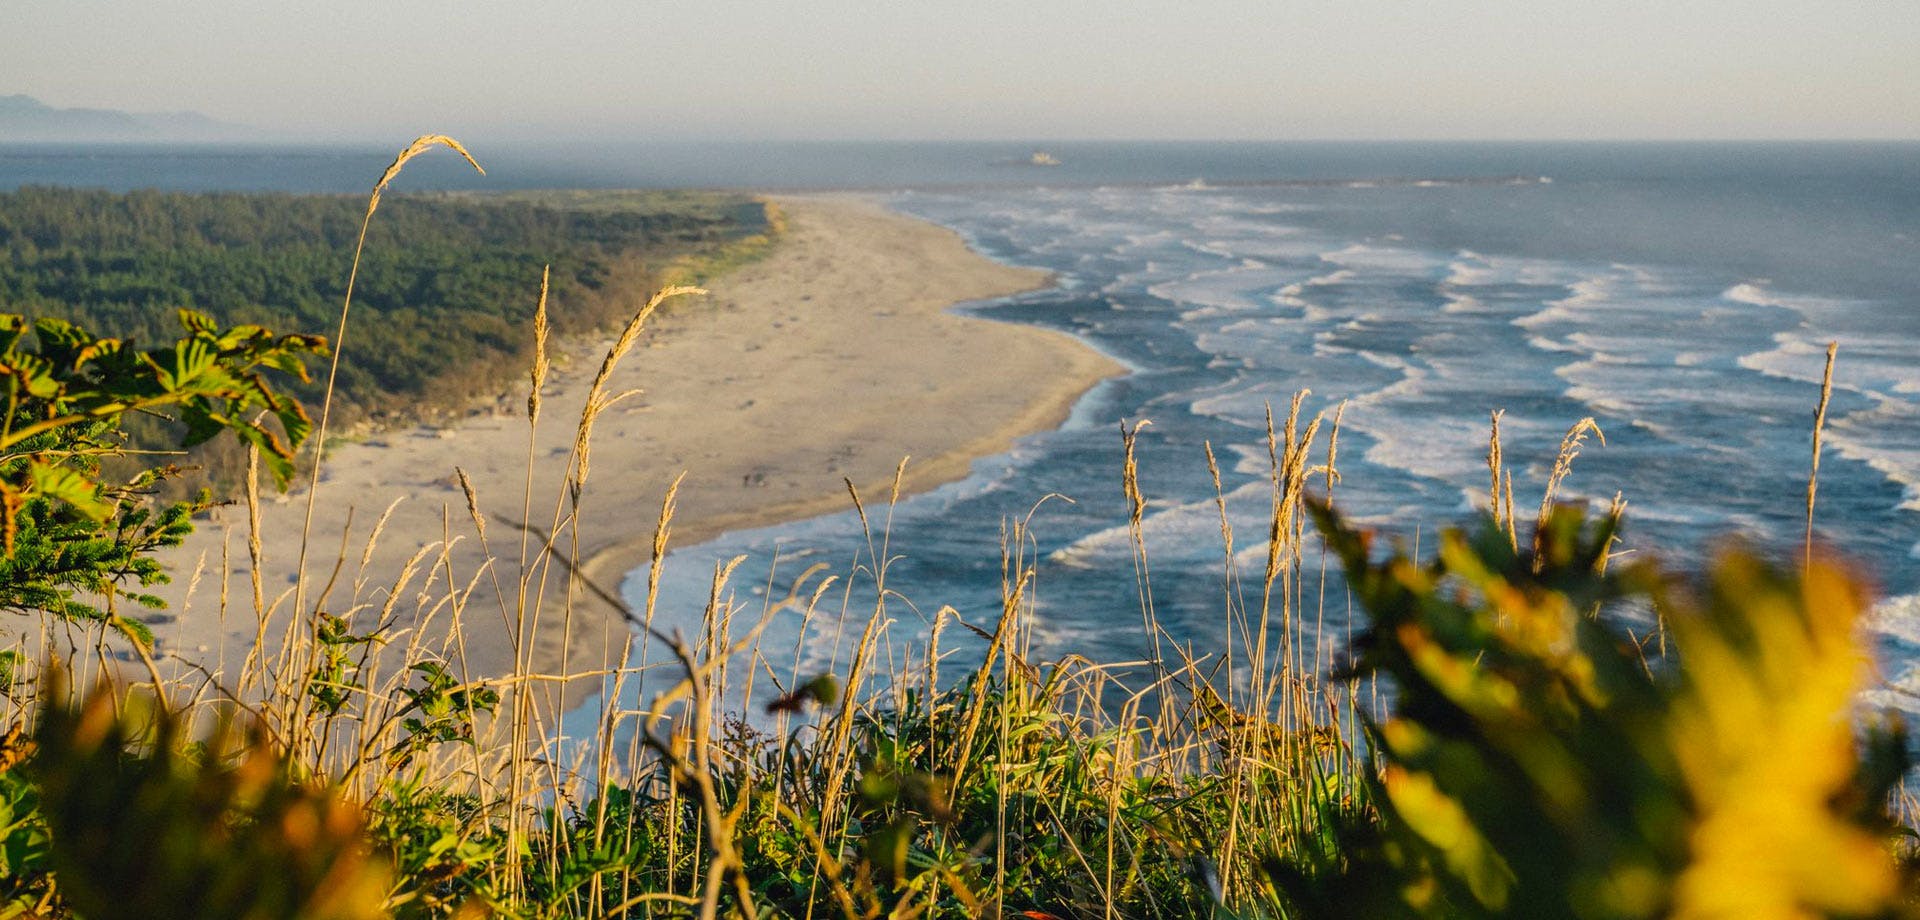 A photo of a coastline with grass and ferns in the foreground. there are waves and white water.